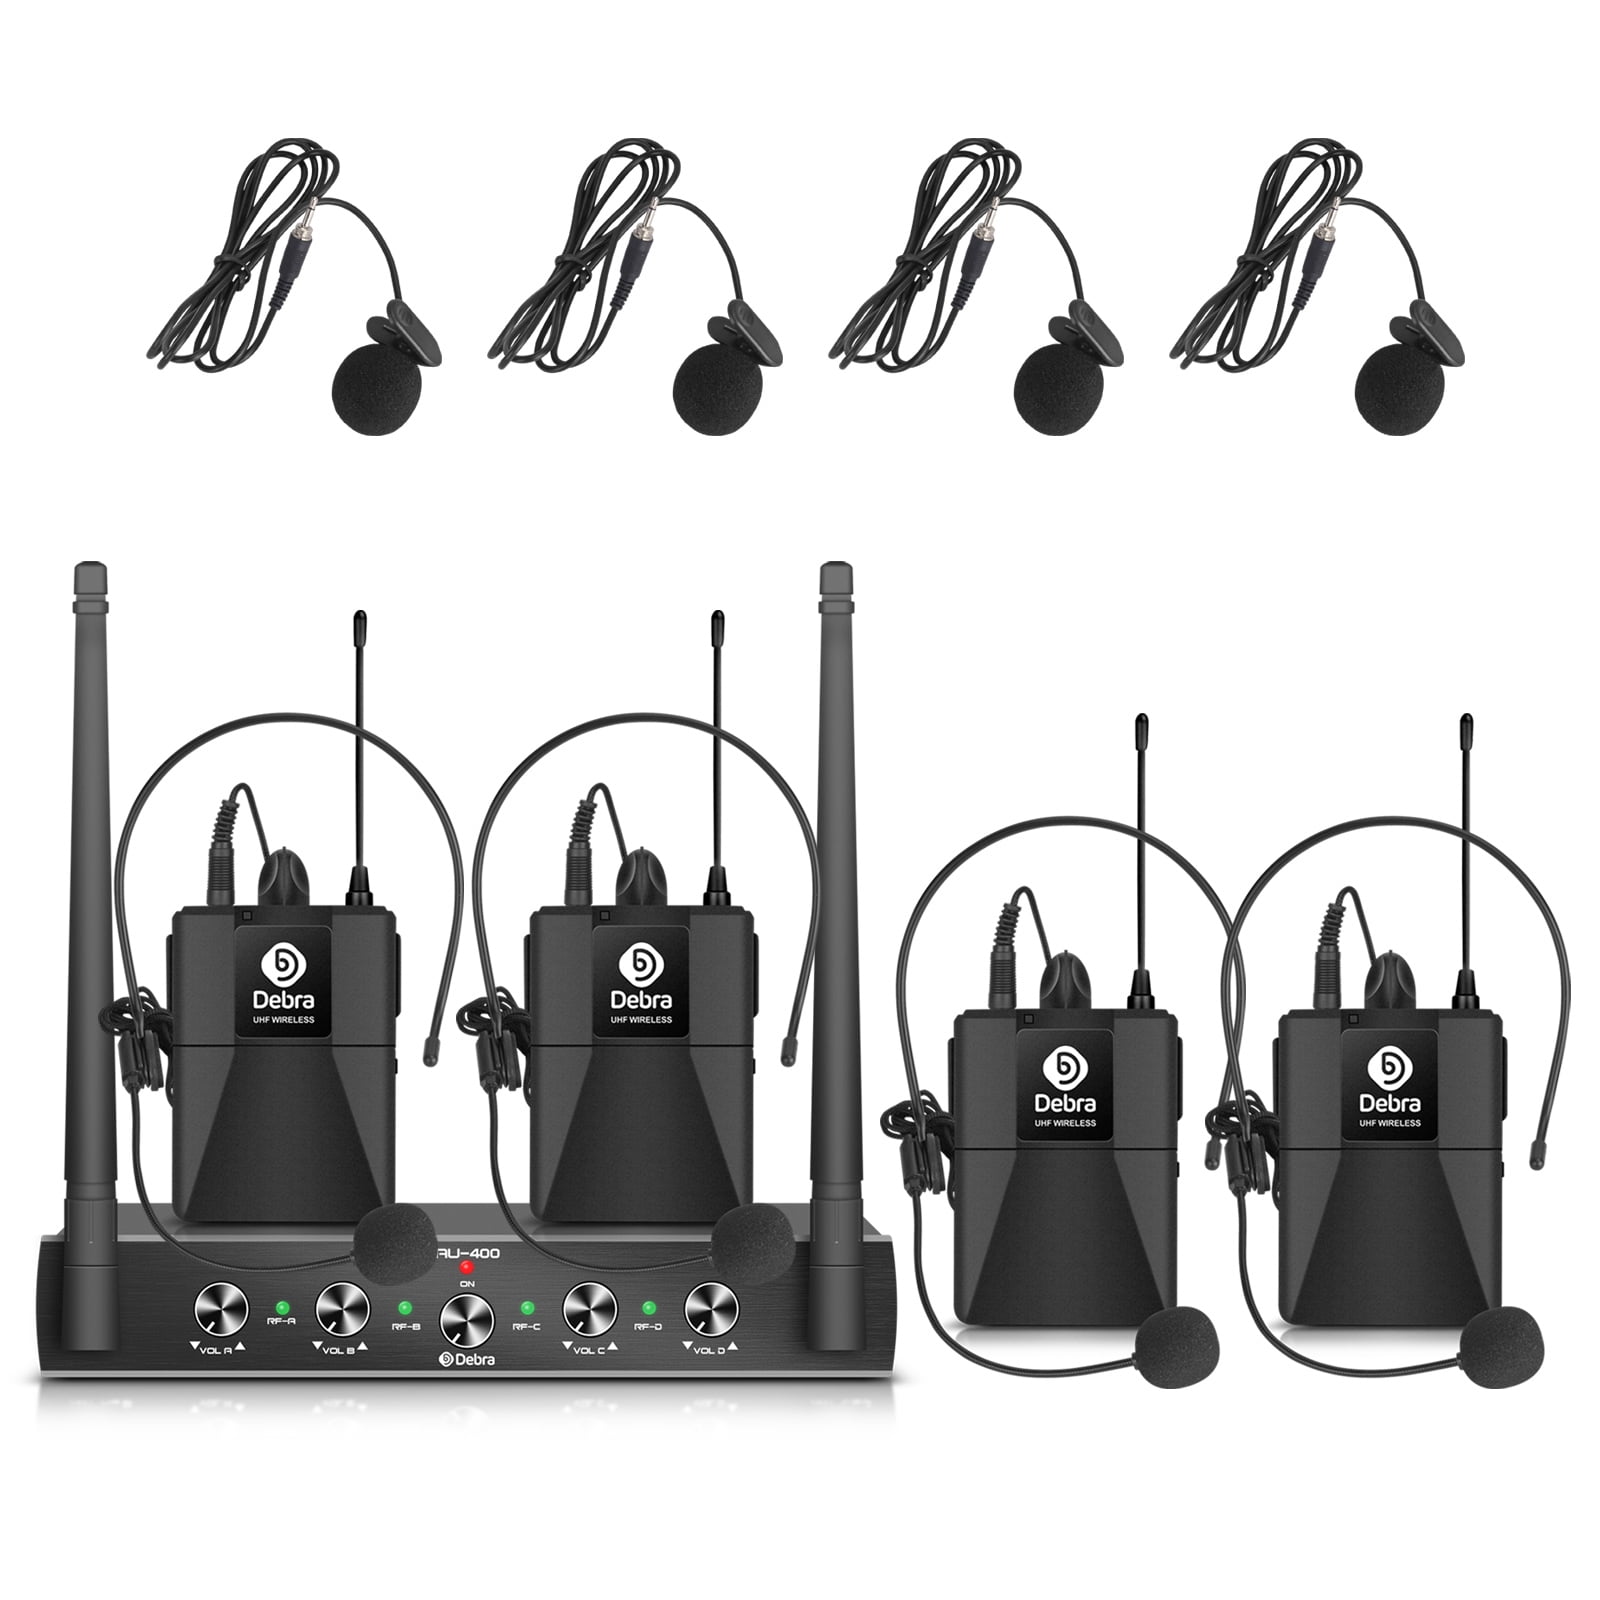 Pro UHF 4 Channel Wireless Microphone System D Debra Audio with Cordless  Handheld Lavalier Headset Mics, Metal Receiver, Ideal for Karaoke Church